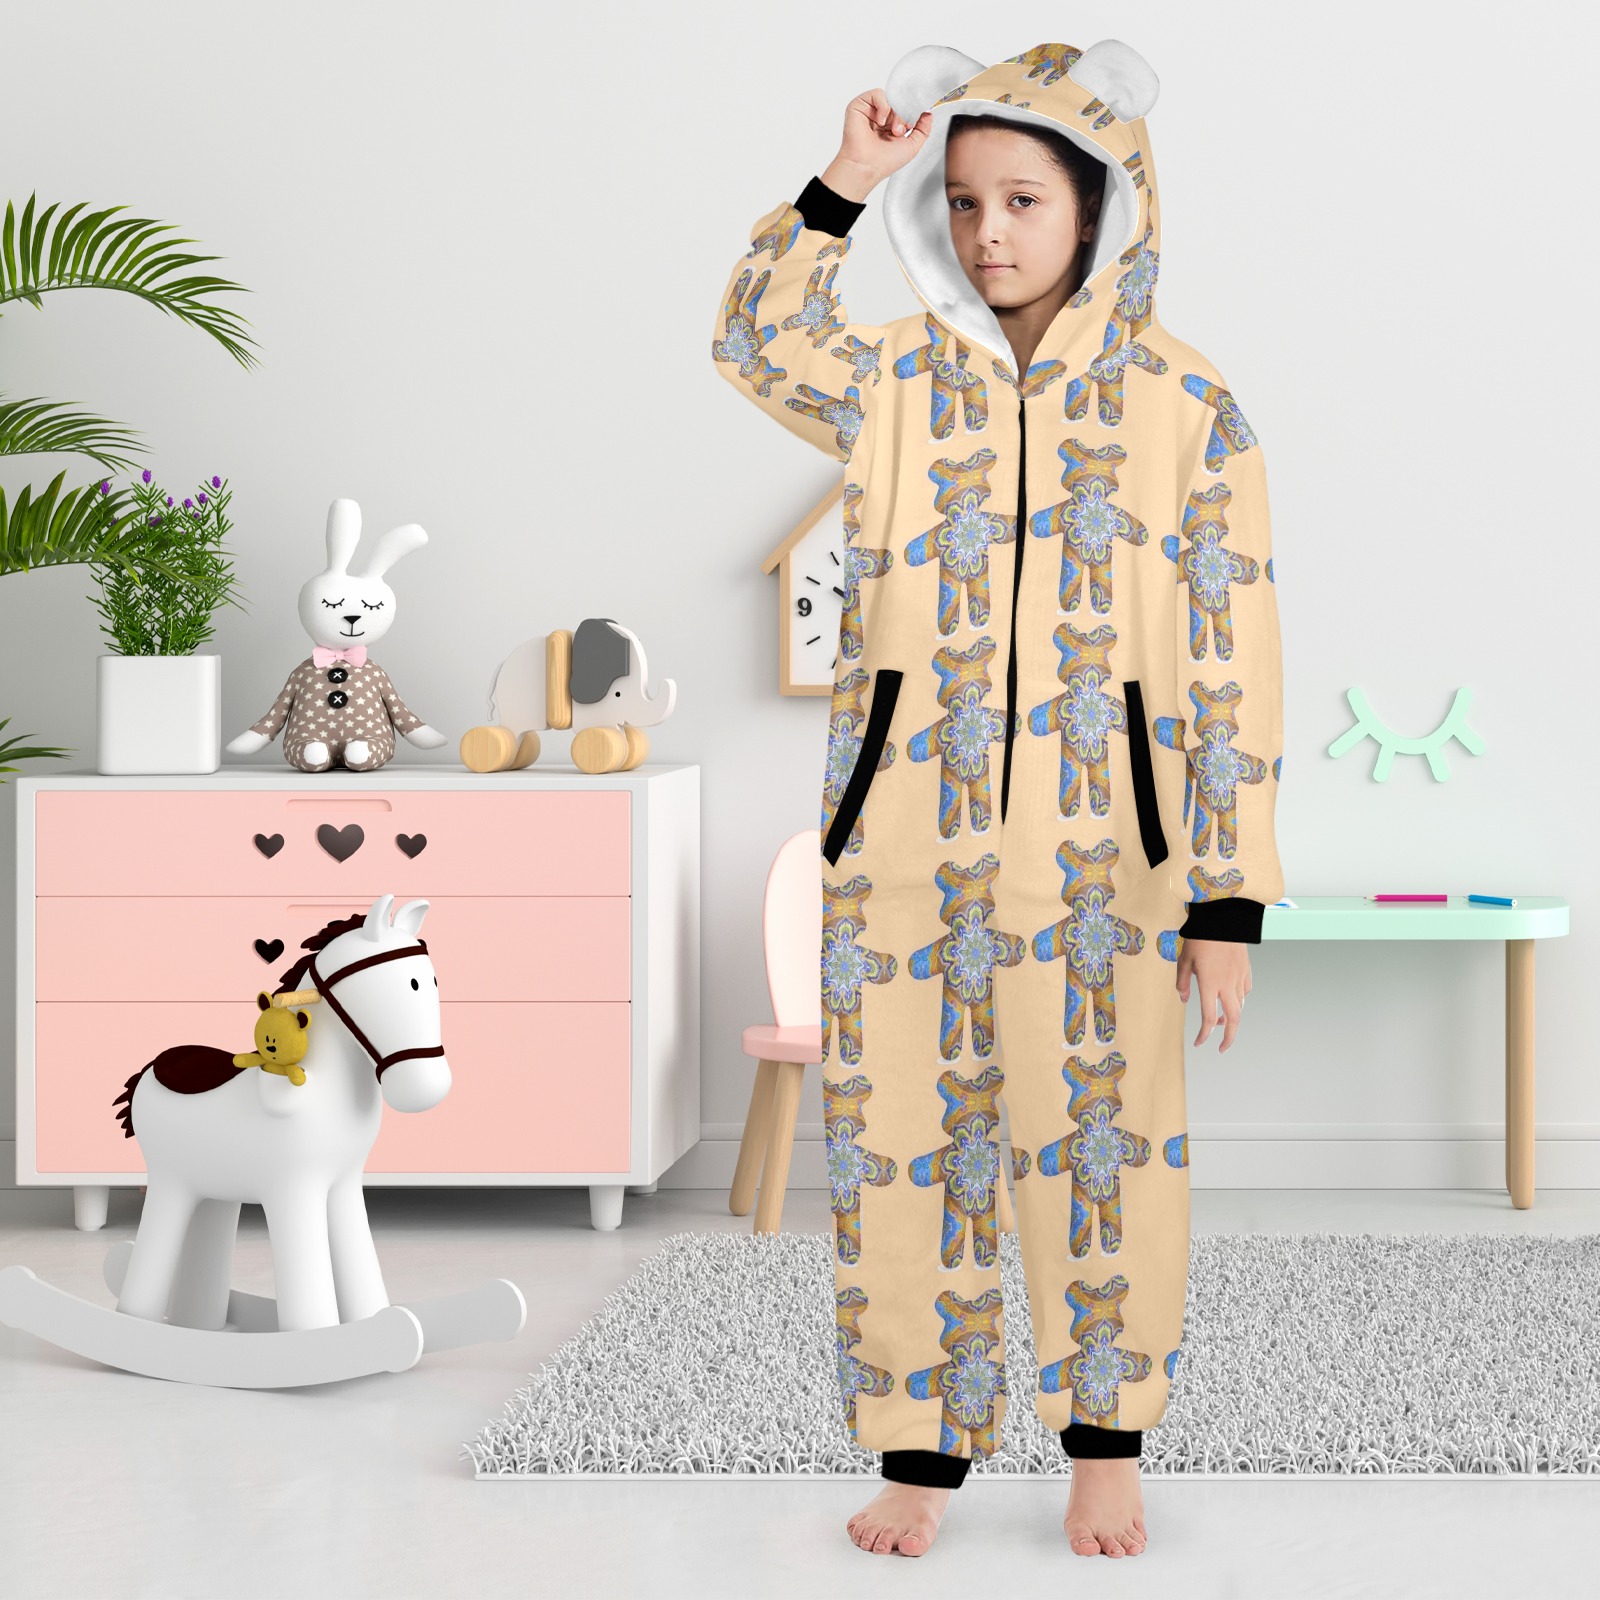 nounours 3 i One-Piece Zip Up Hooded Pajamas for Big Kids